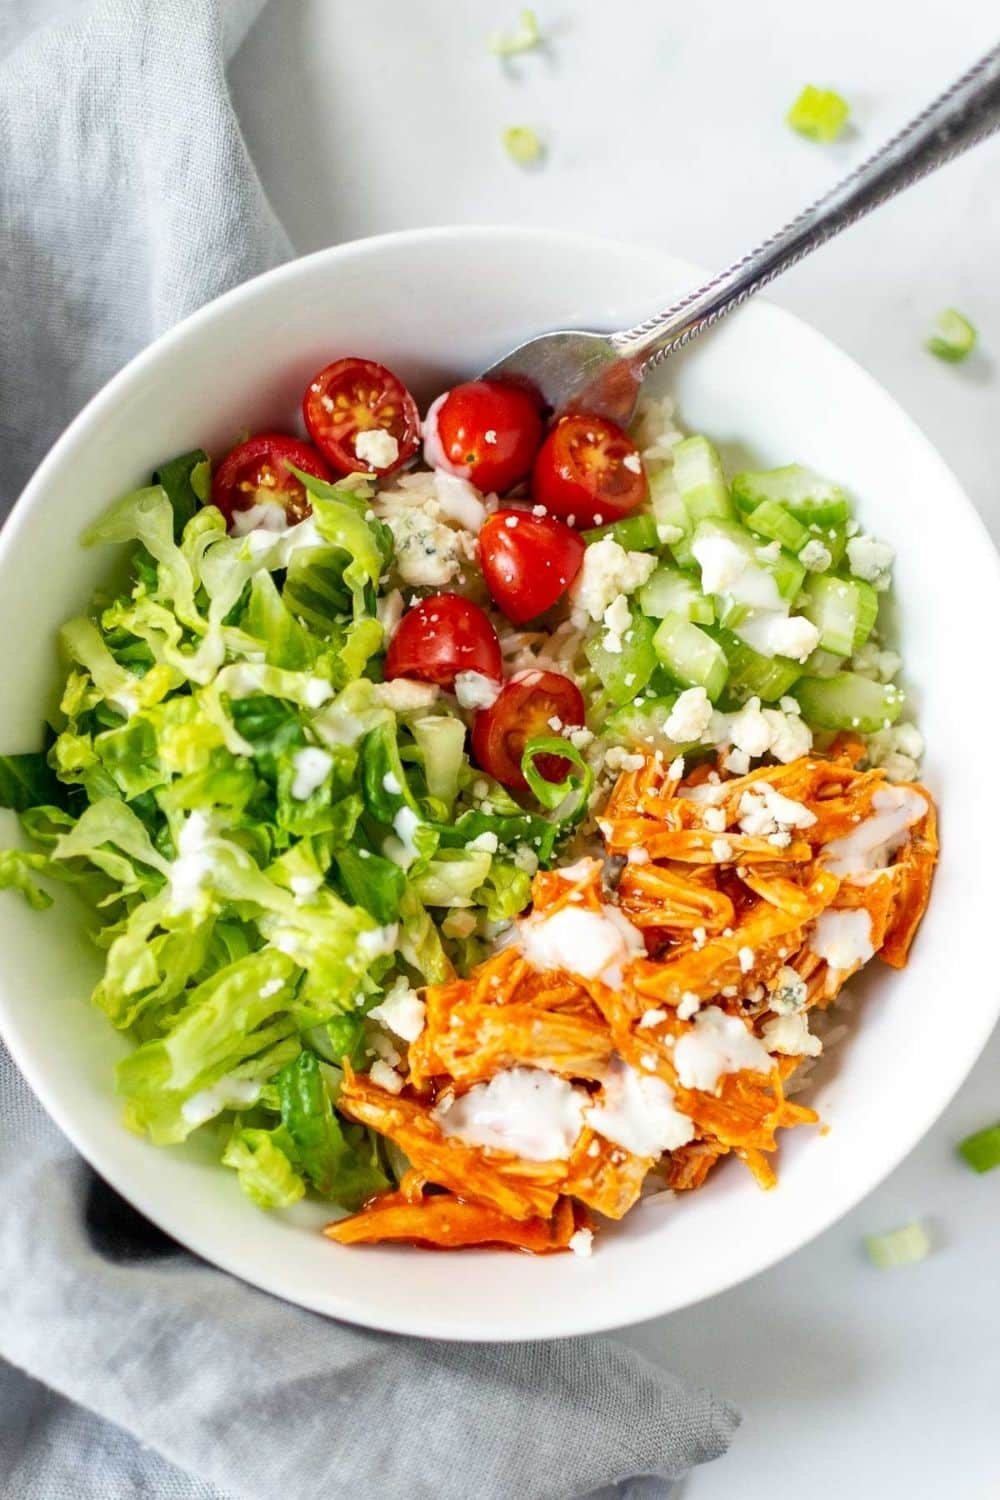 Buffalo chicken rice bowl with chicken and veggies in a white bowl